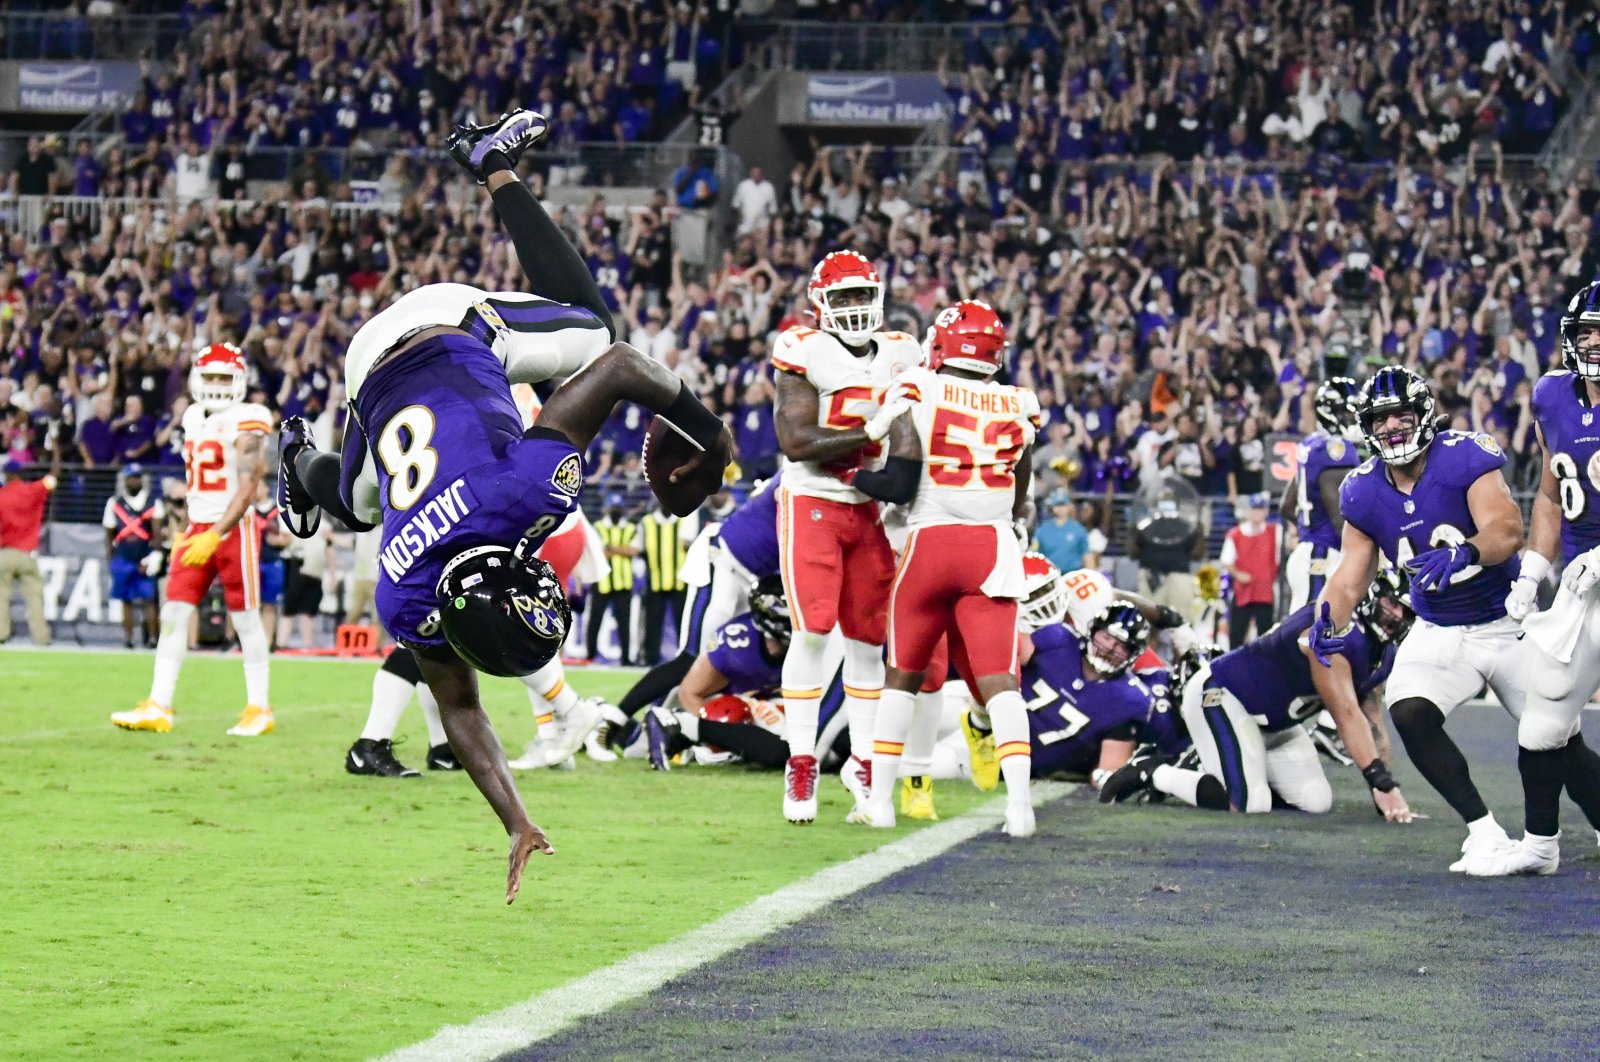 Baltimore Ravens quarterback Lamar Jackson (8) flips into the end zone for a fourth-quarter touchdown against the Kansas City Chiefs at M&T Bank Stadium, Baltimore, Maryland, U.S., Sept. 19, 2021. (Tommy Gilligan-USA TODAY Sports via REUTERS)